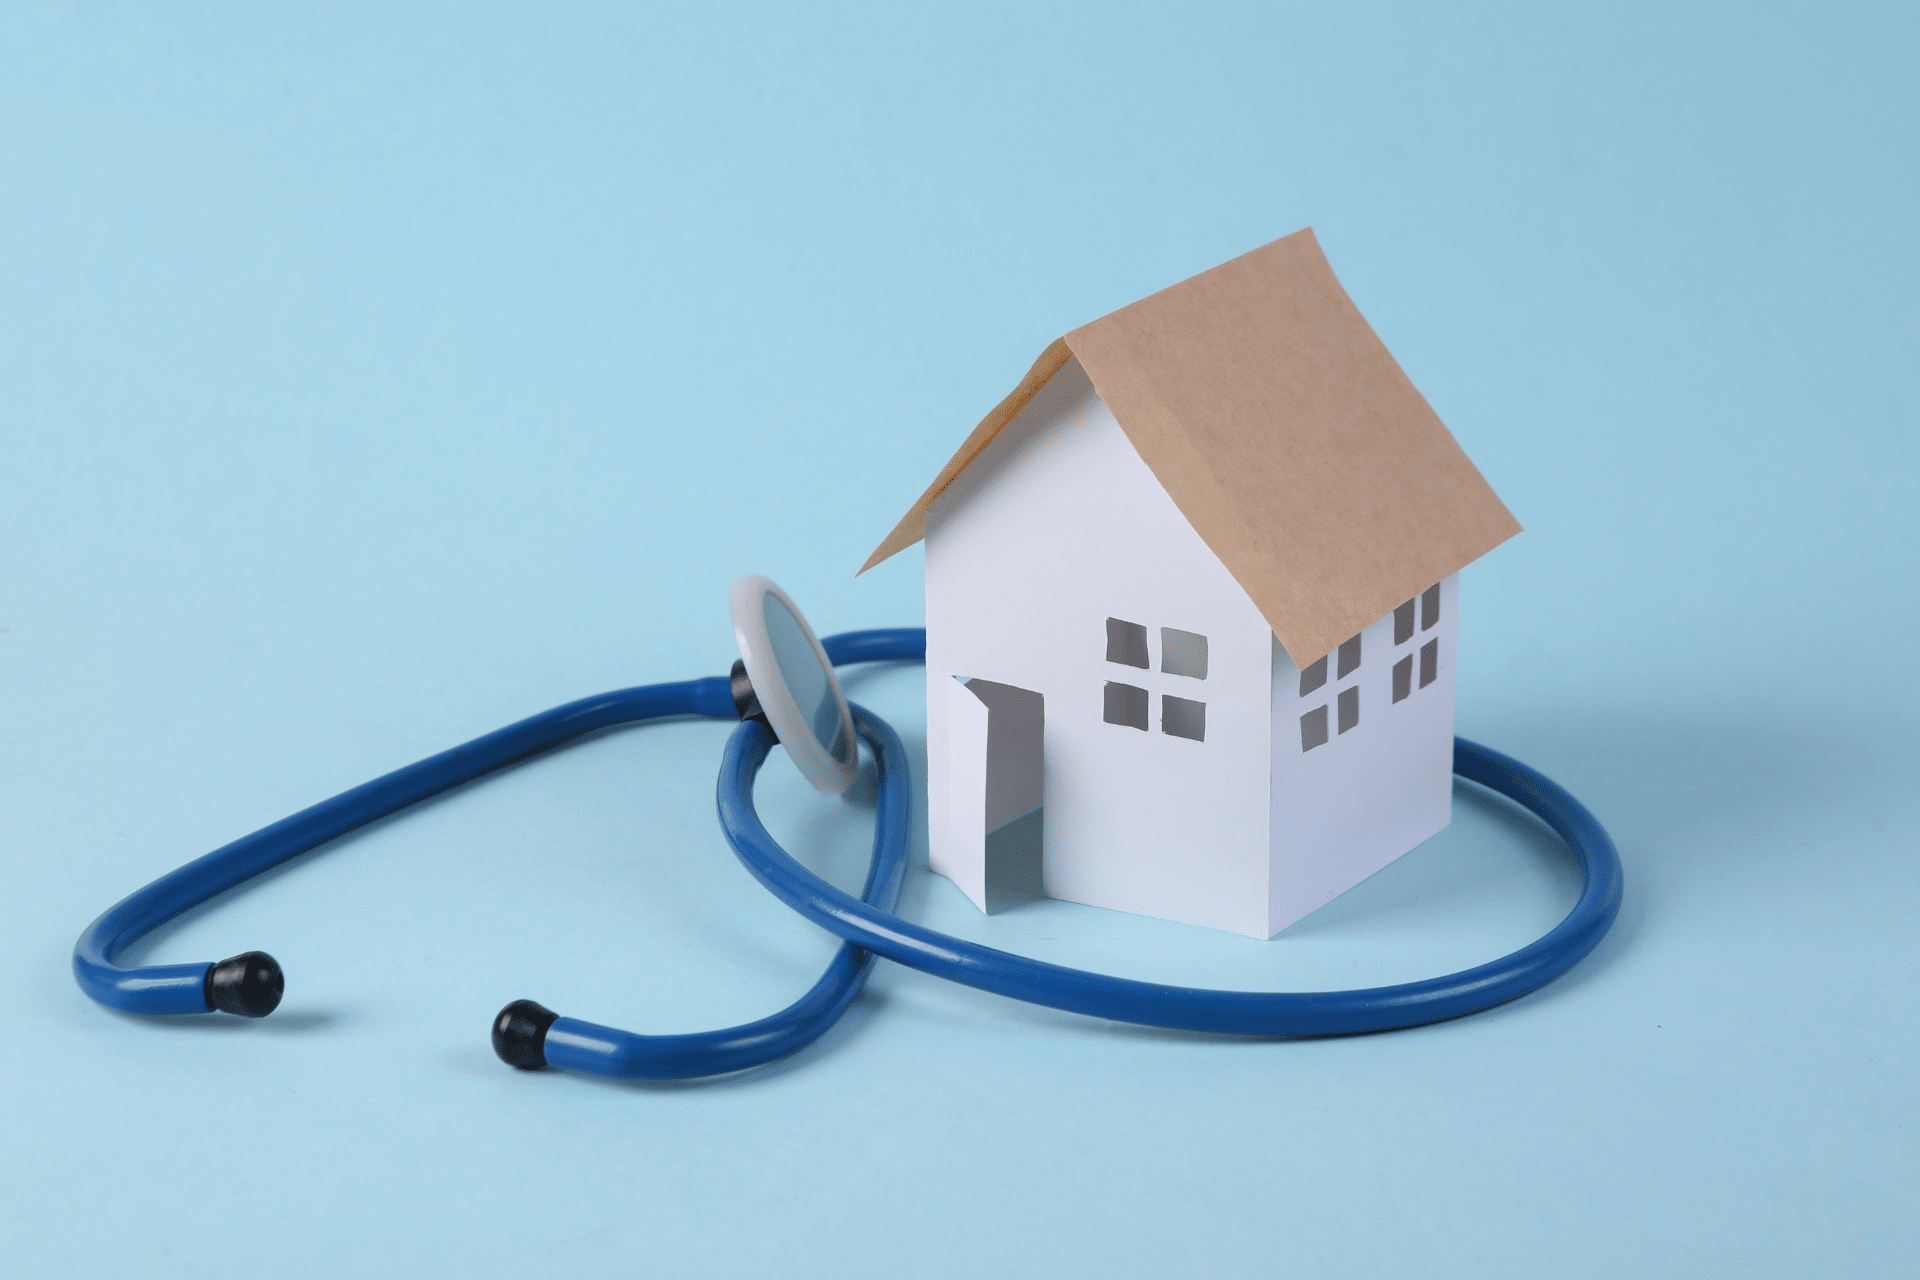 House and stethoscope are shown to illustrate housing and health connections